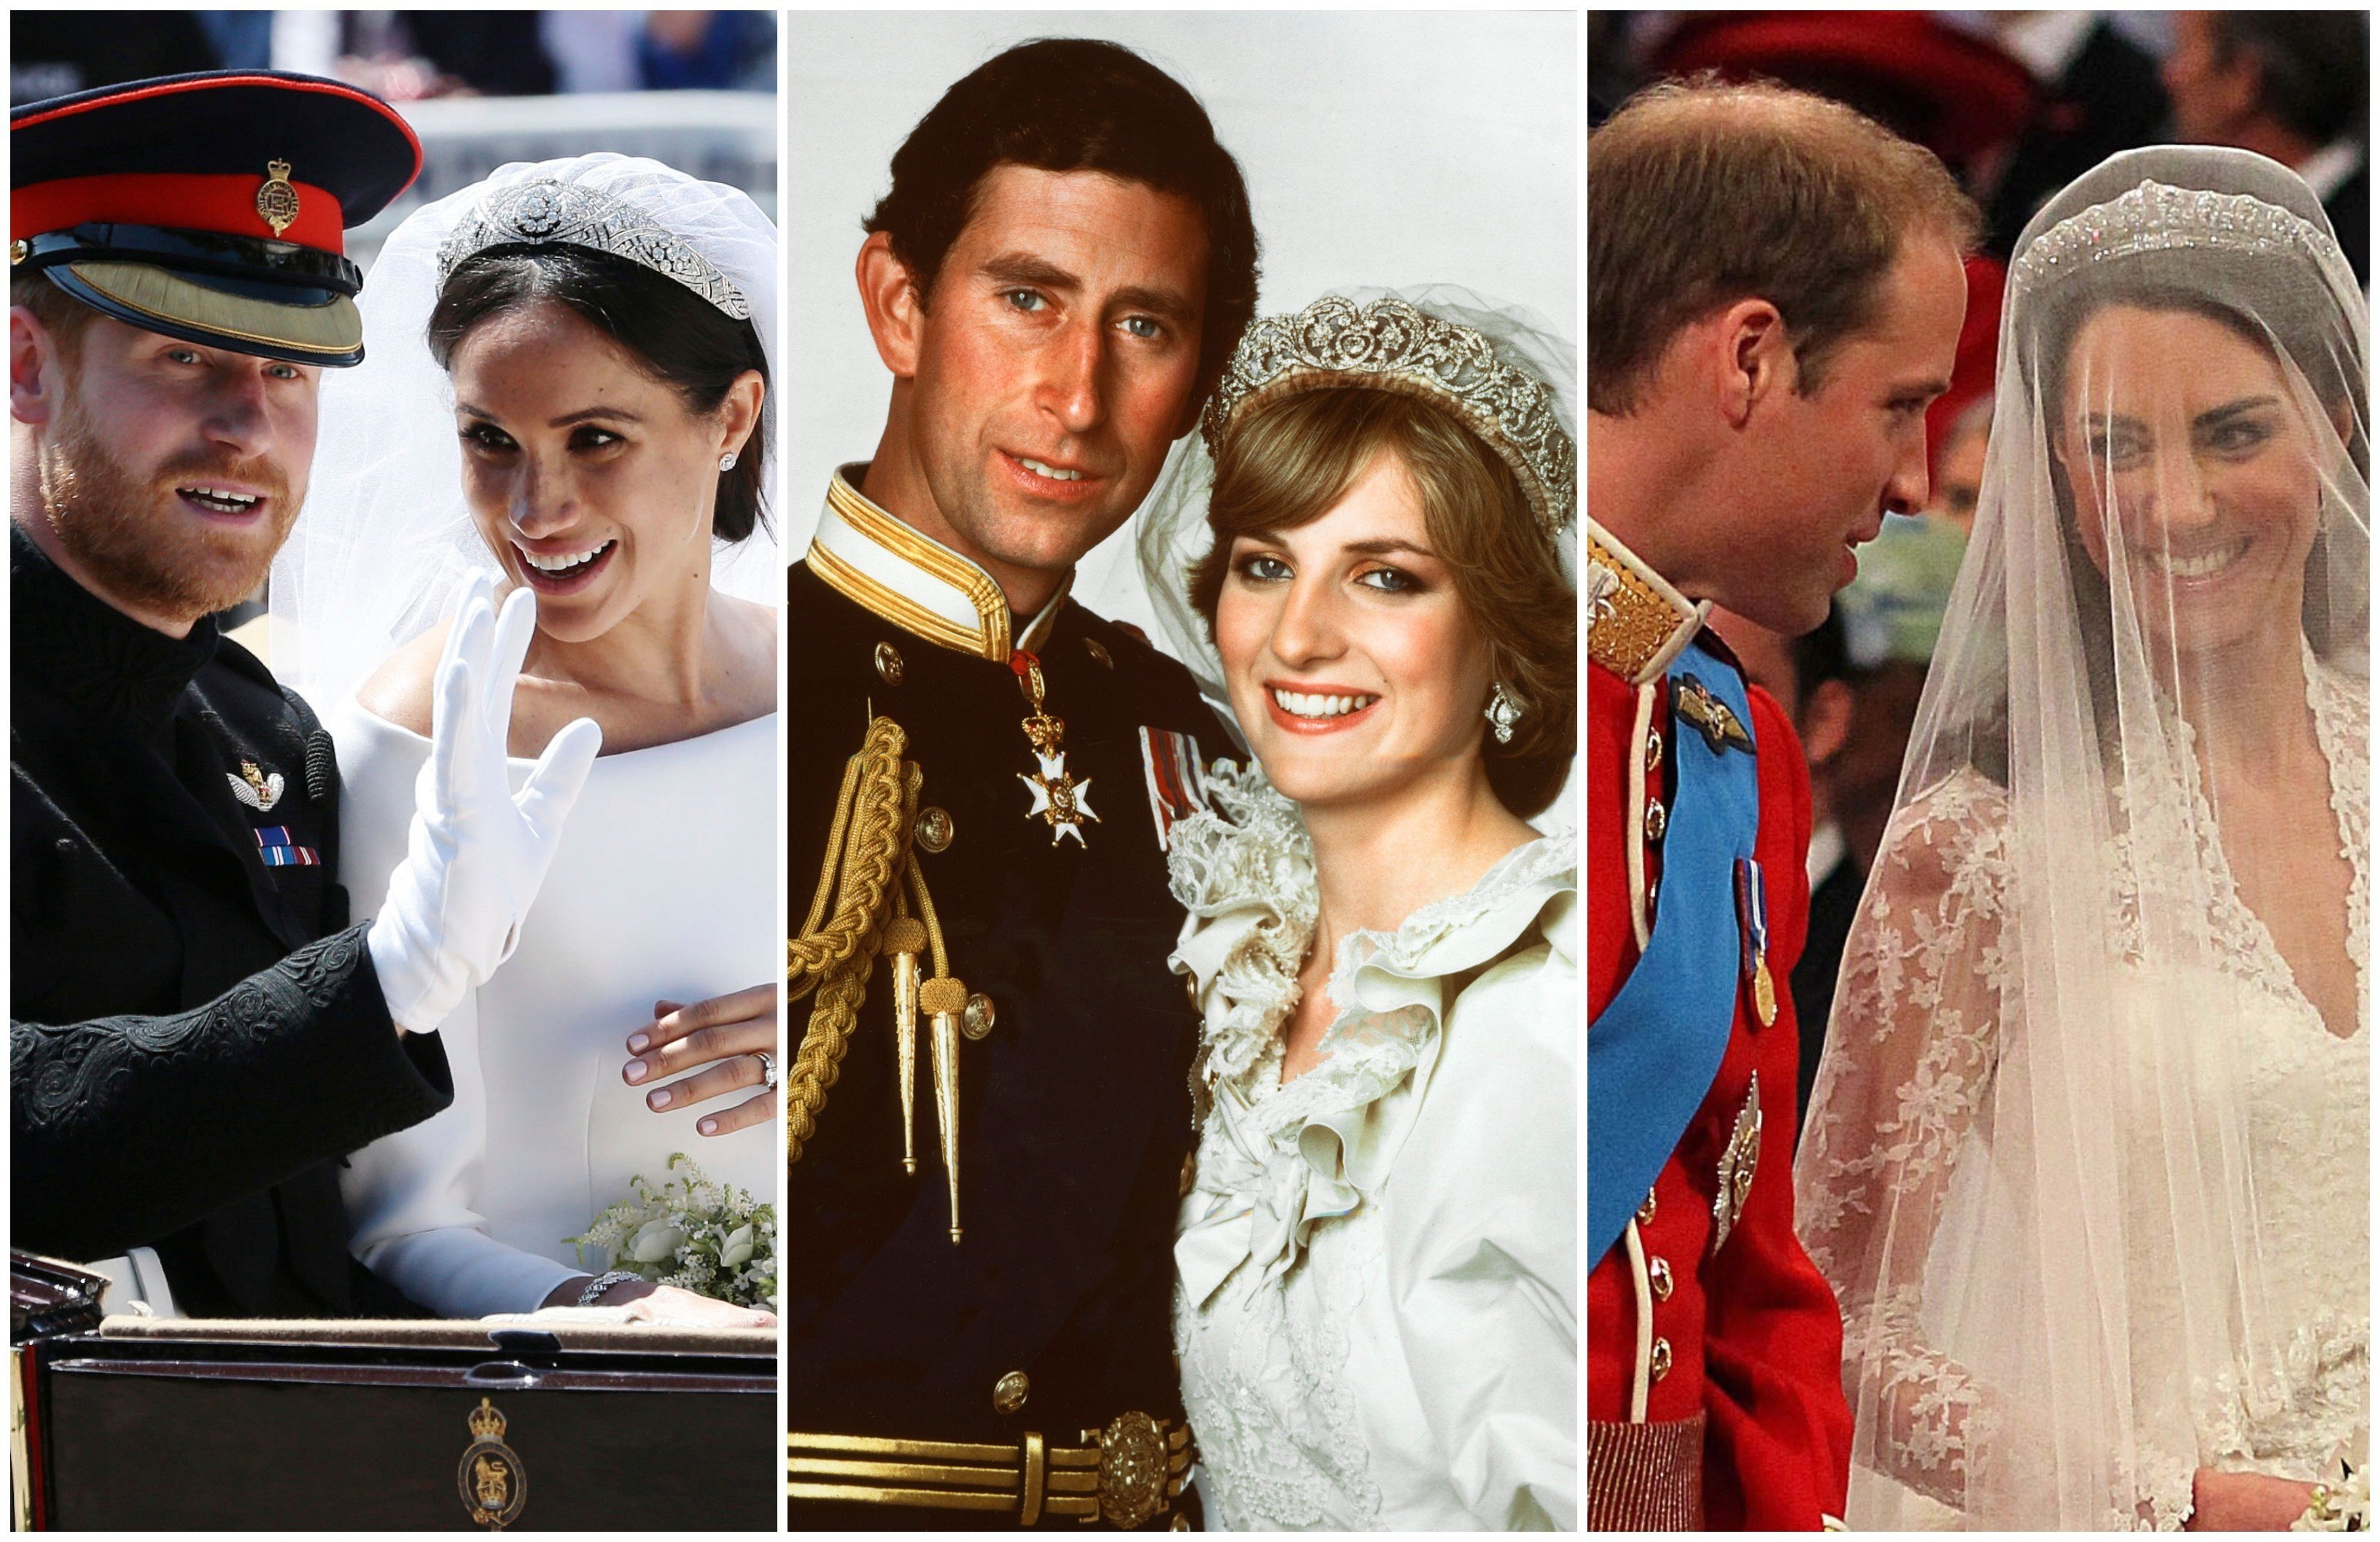 15 ways British royals broke tradition at their weddings, from Prince Harry and Meghan Markle's secret ceremony, to Prince William and Kate Middleton's unconventional cake